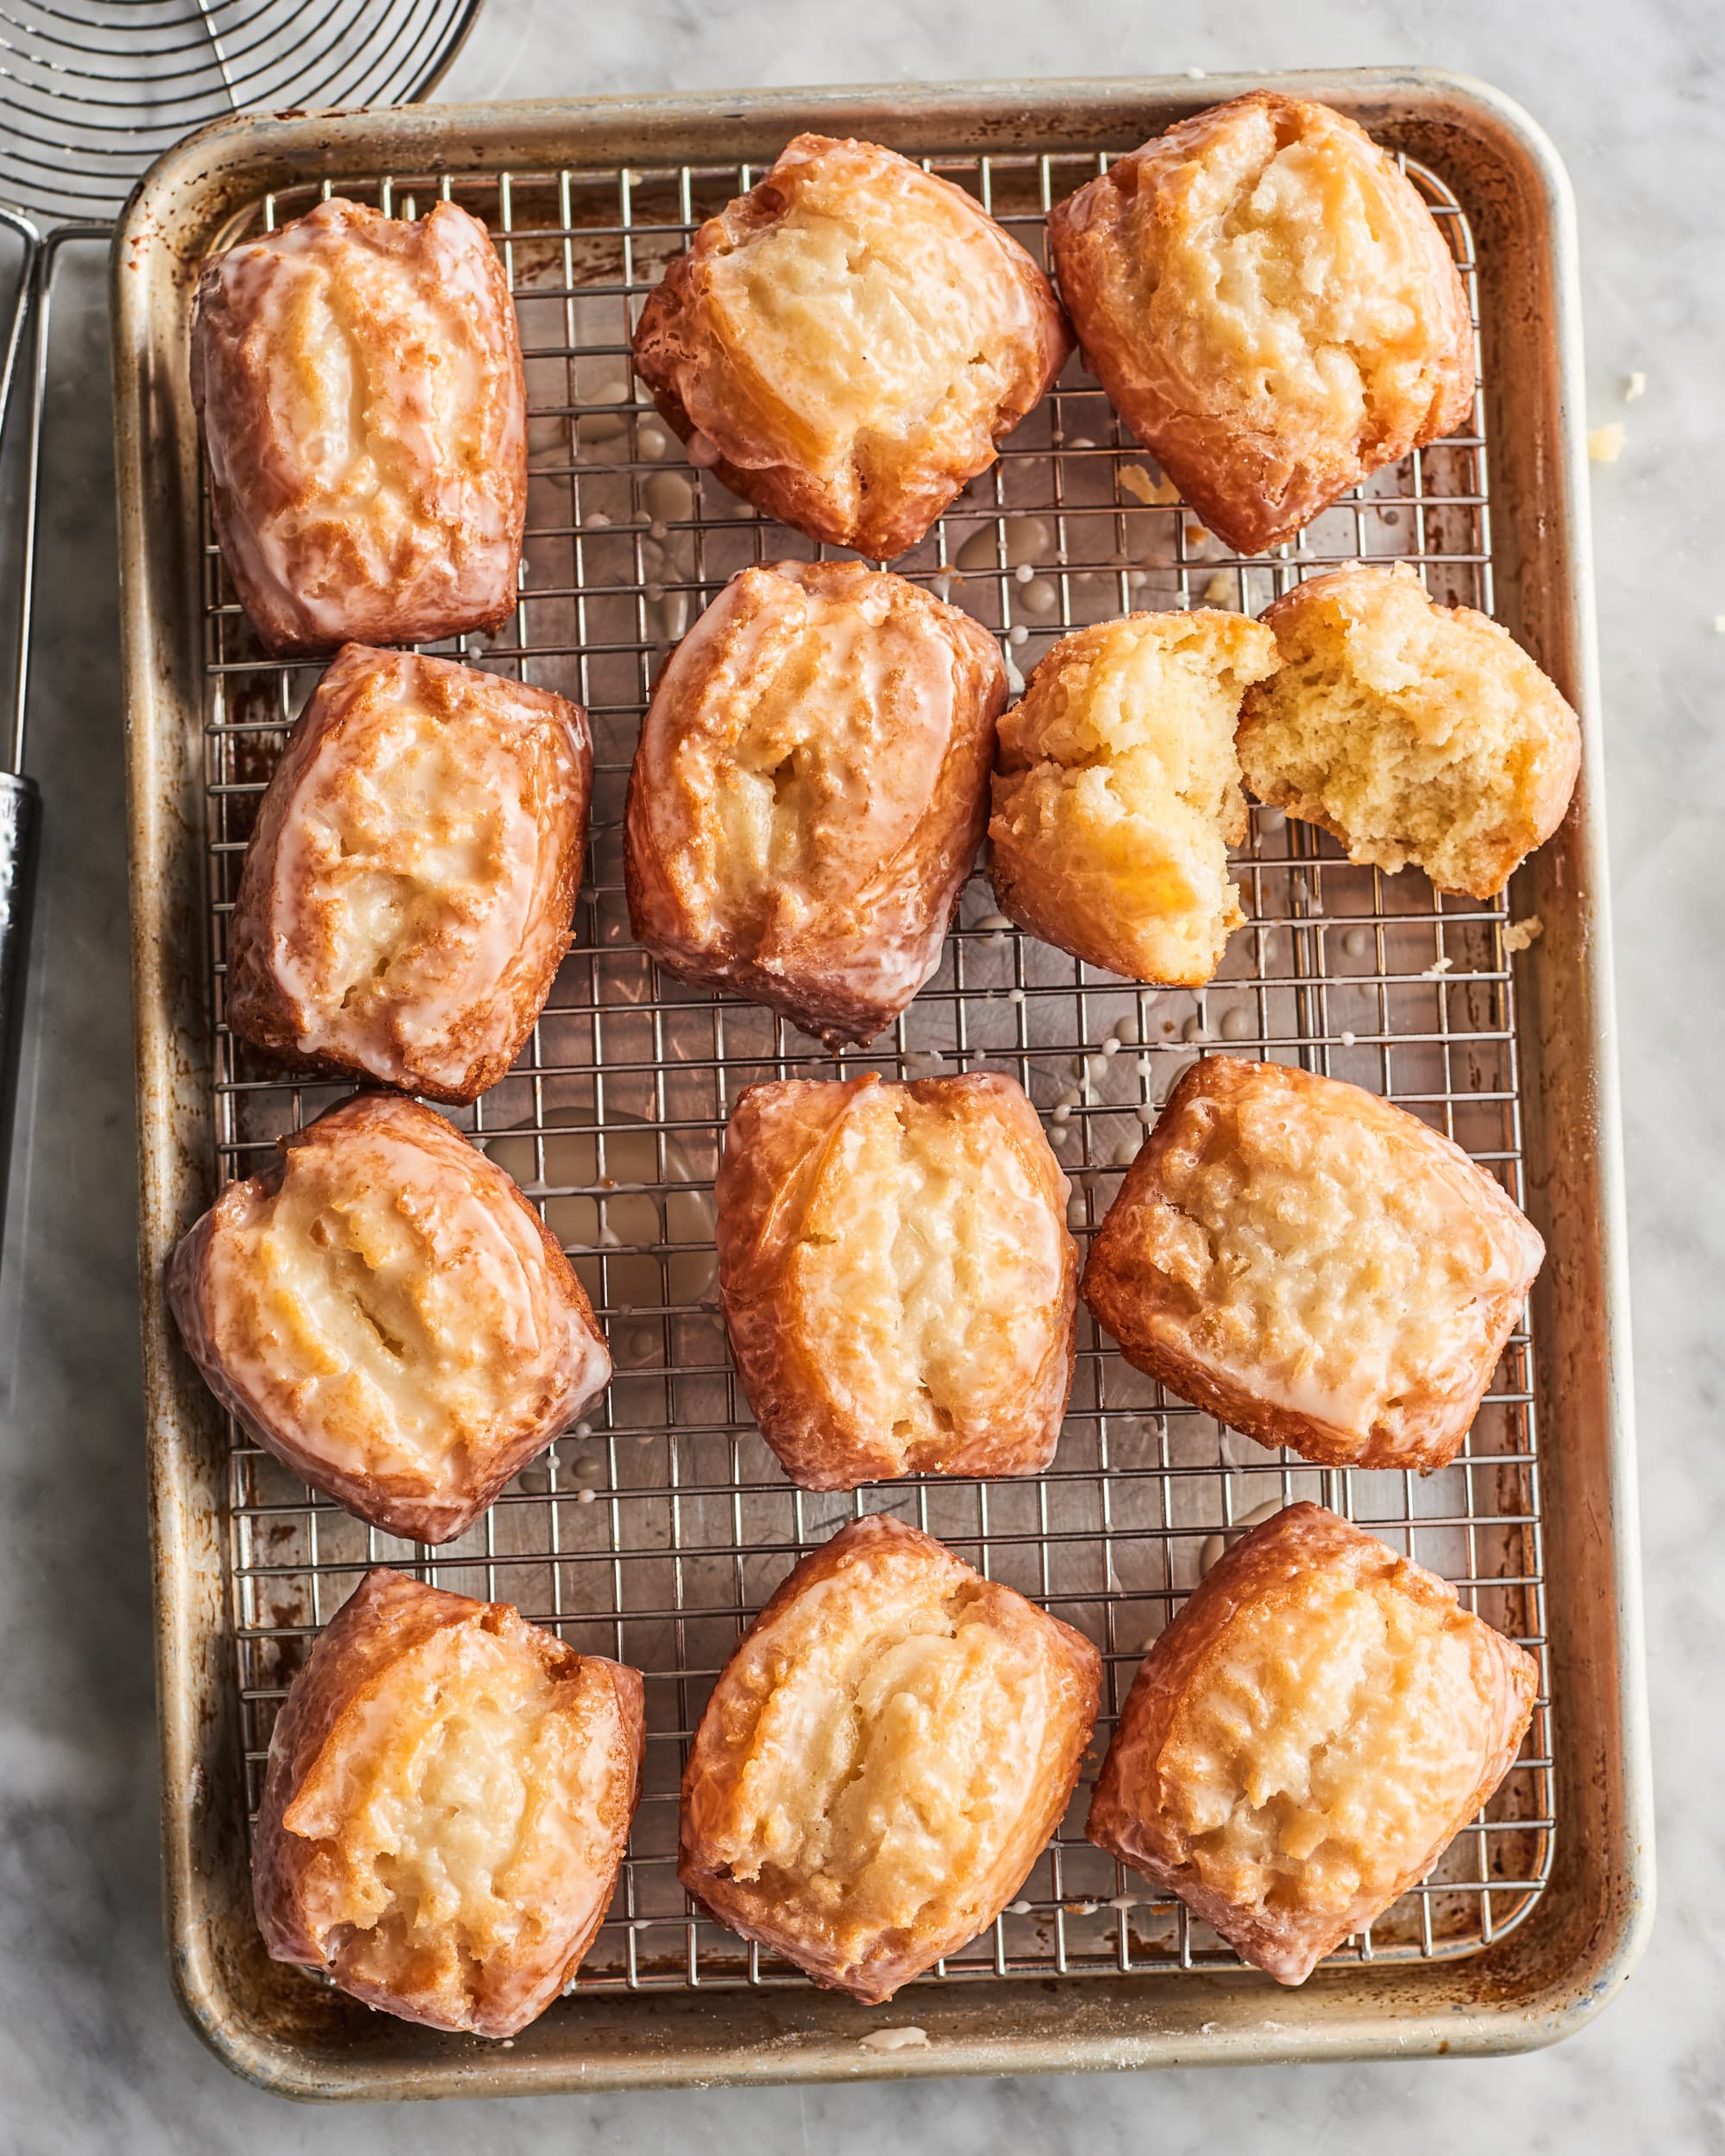 Kitchn's Most Popular Baked Goods of 2020